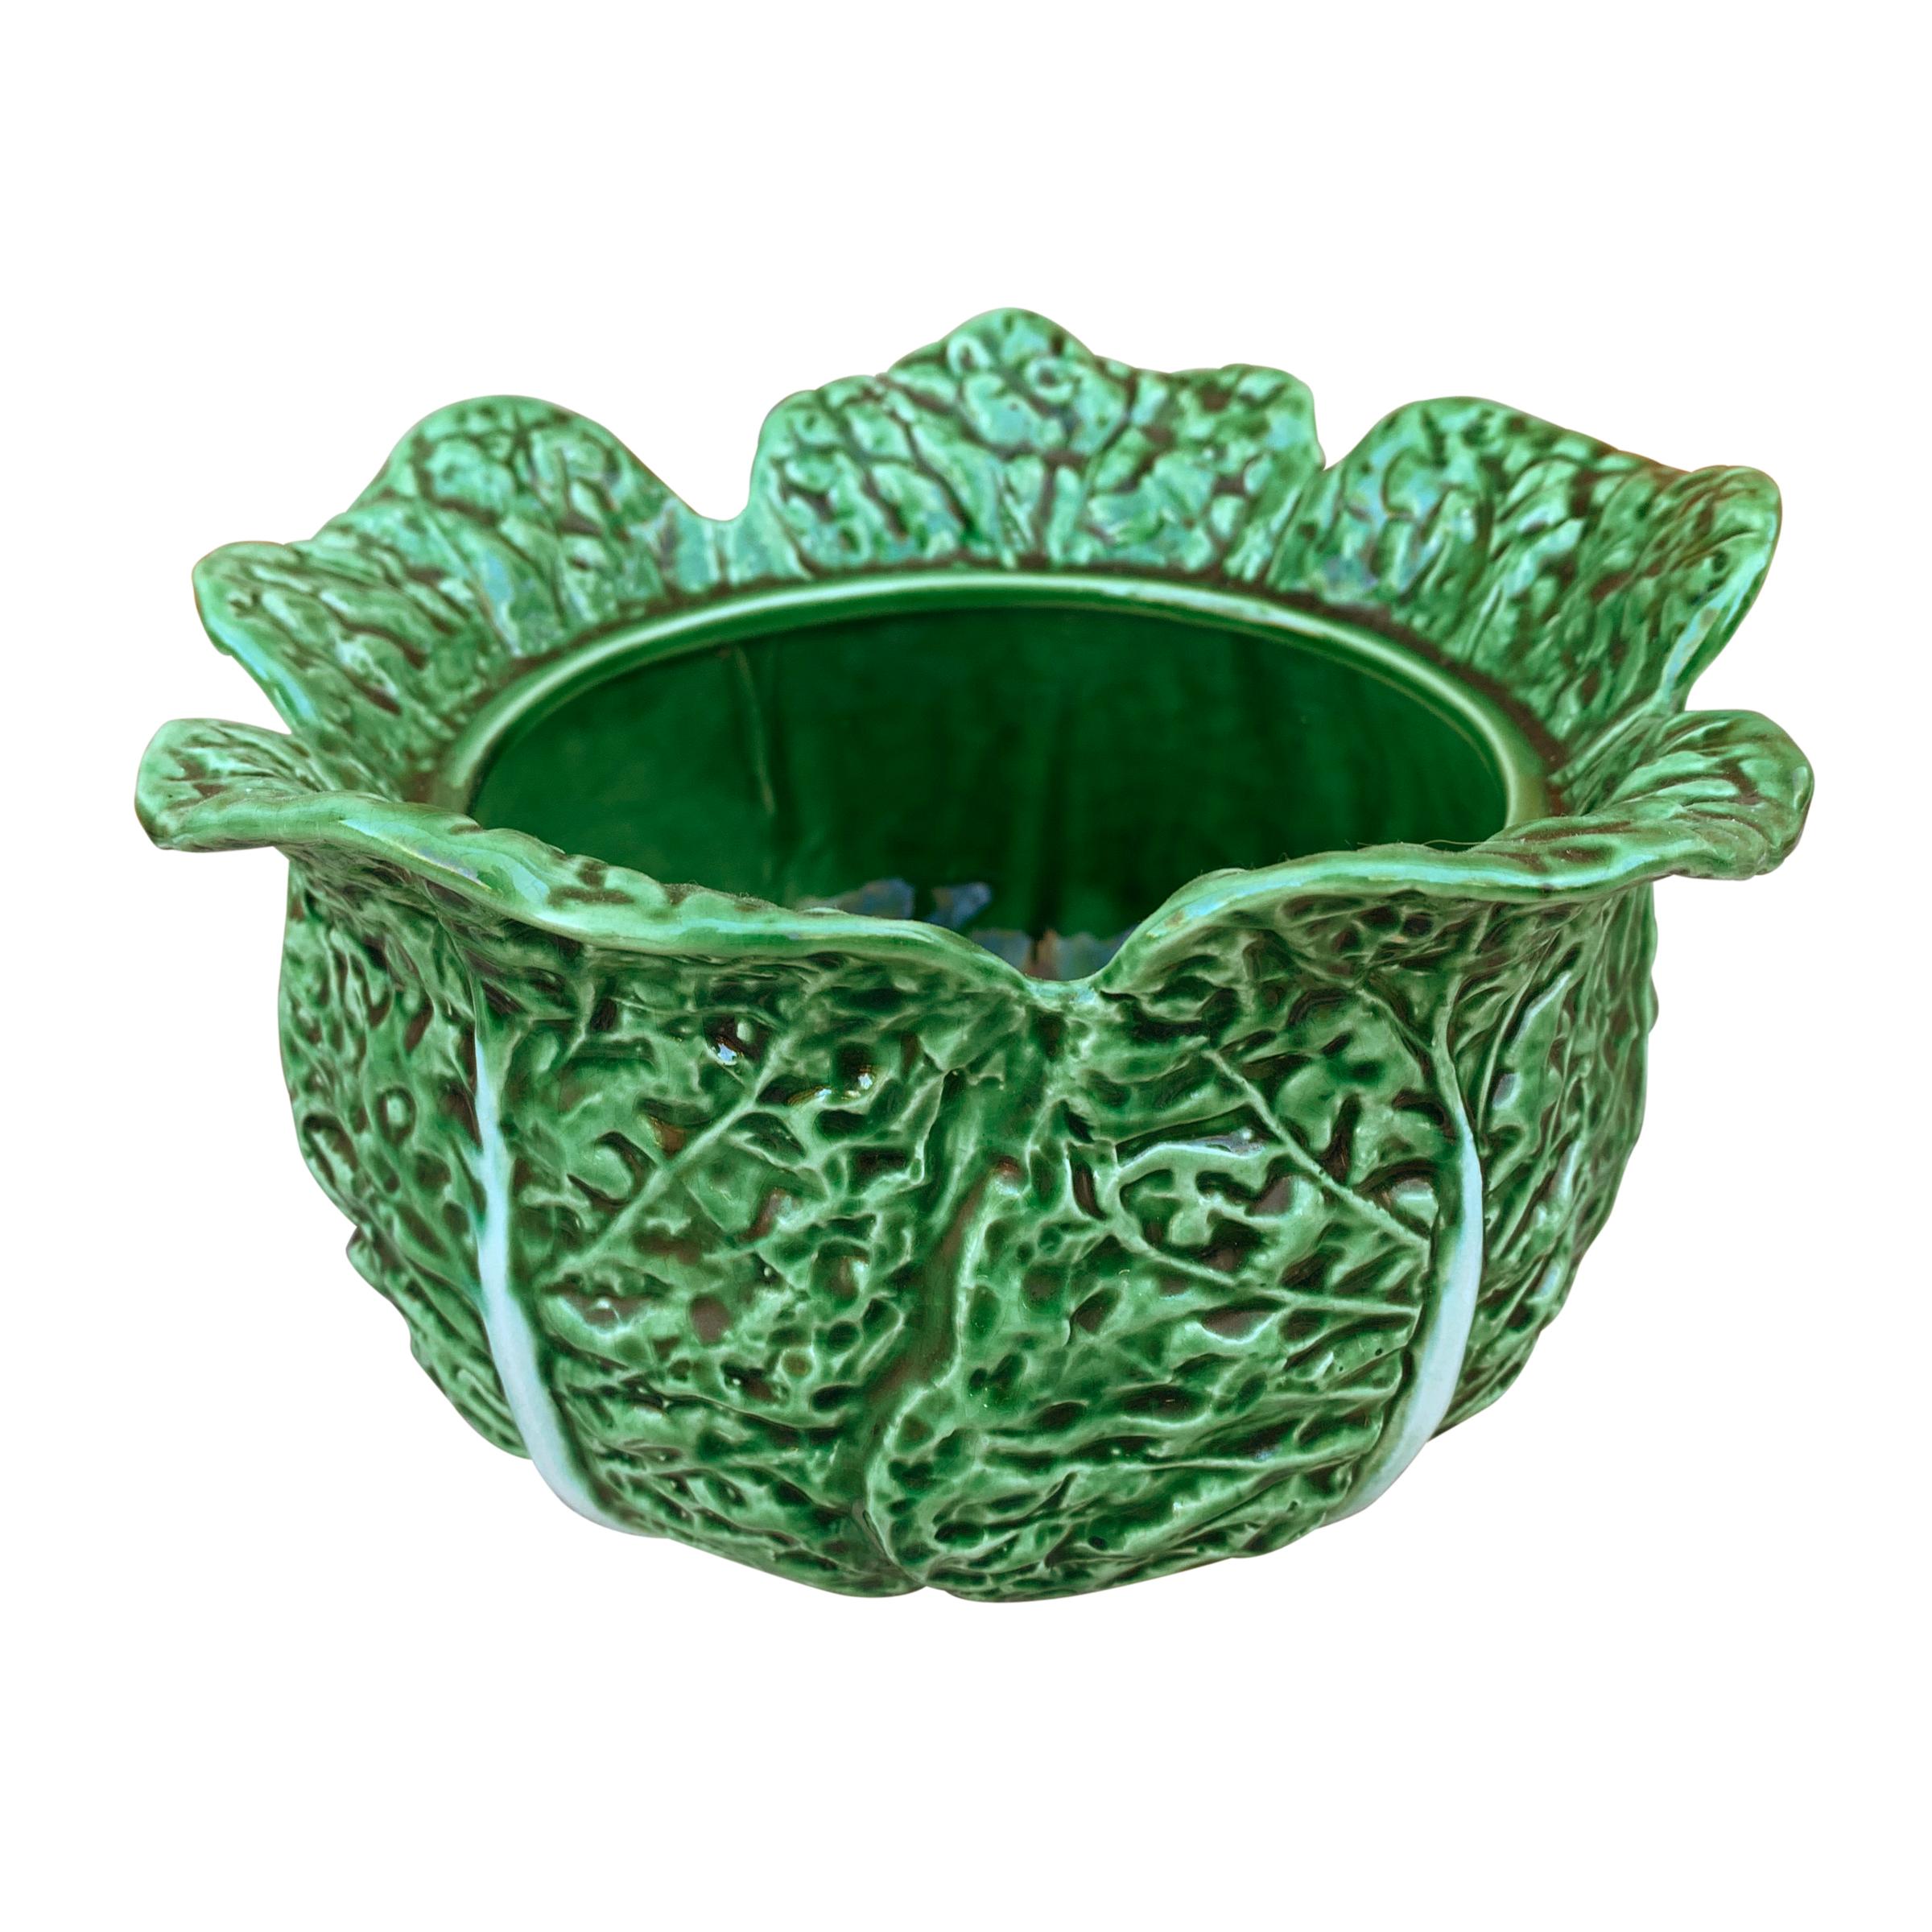 Hand-Crafted Portuguese Cabbage Tureen